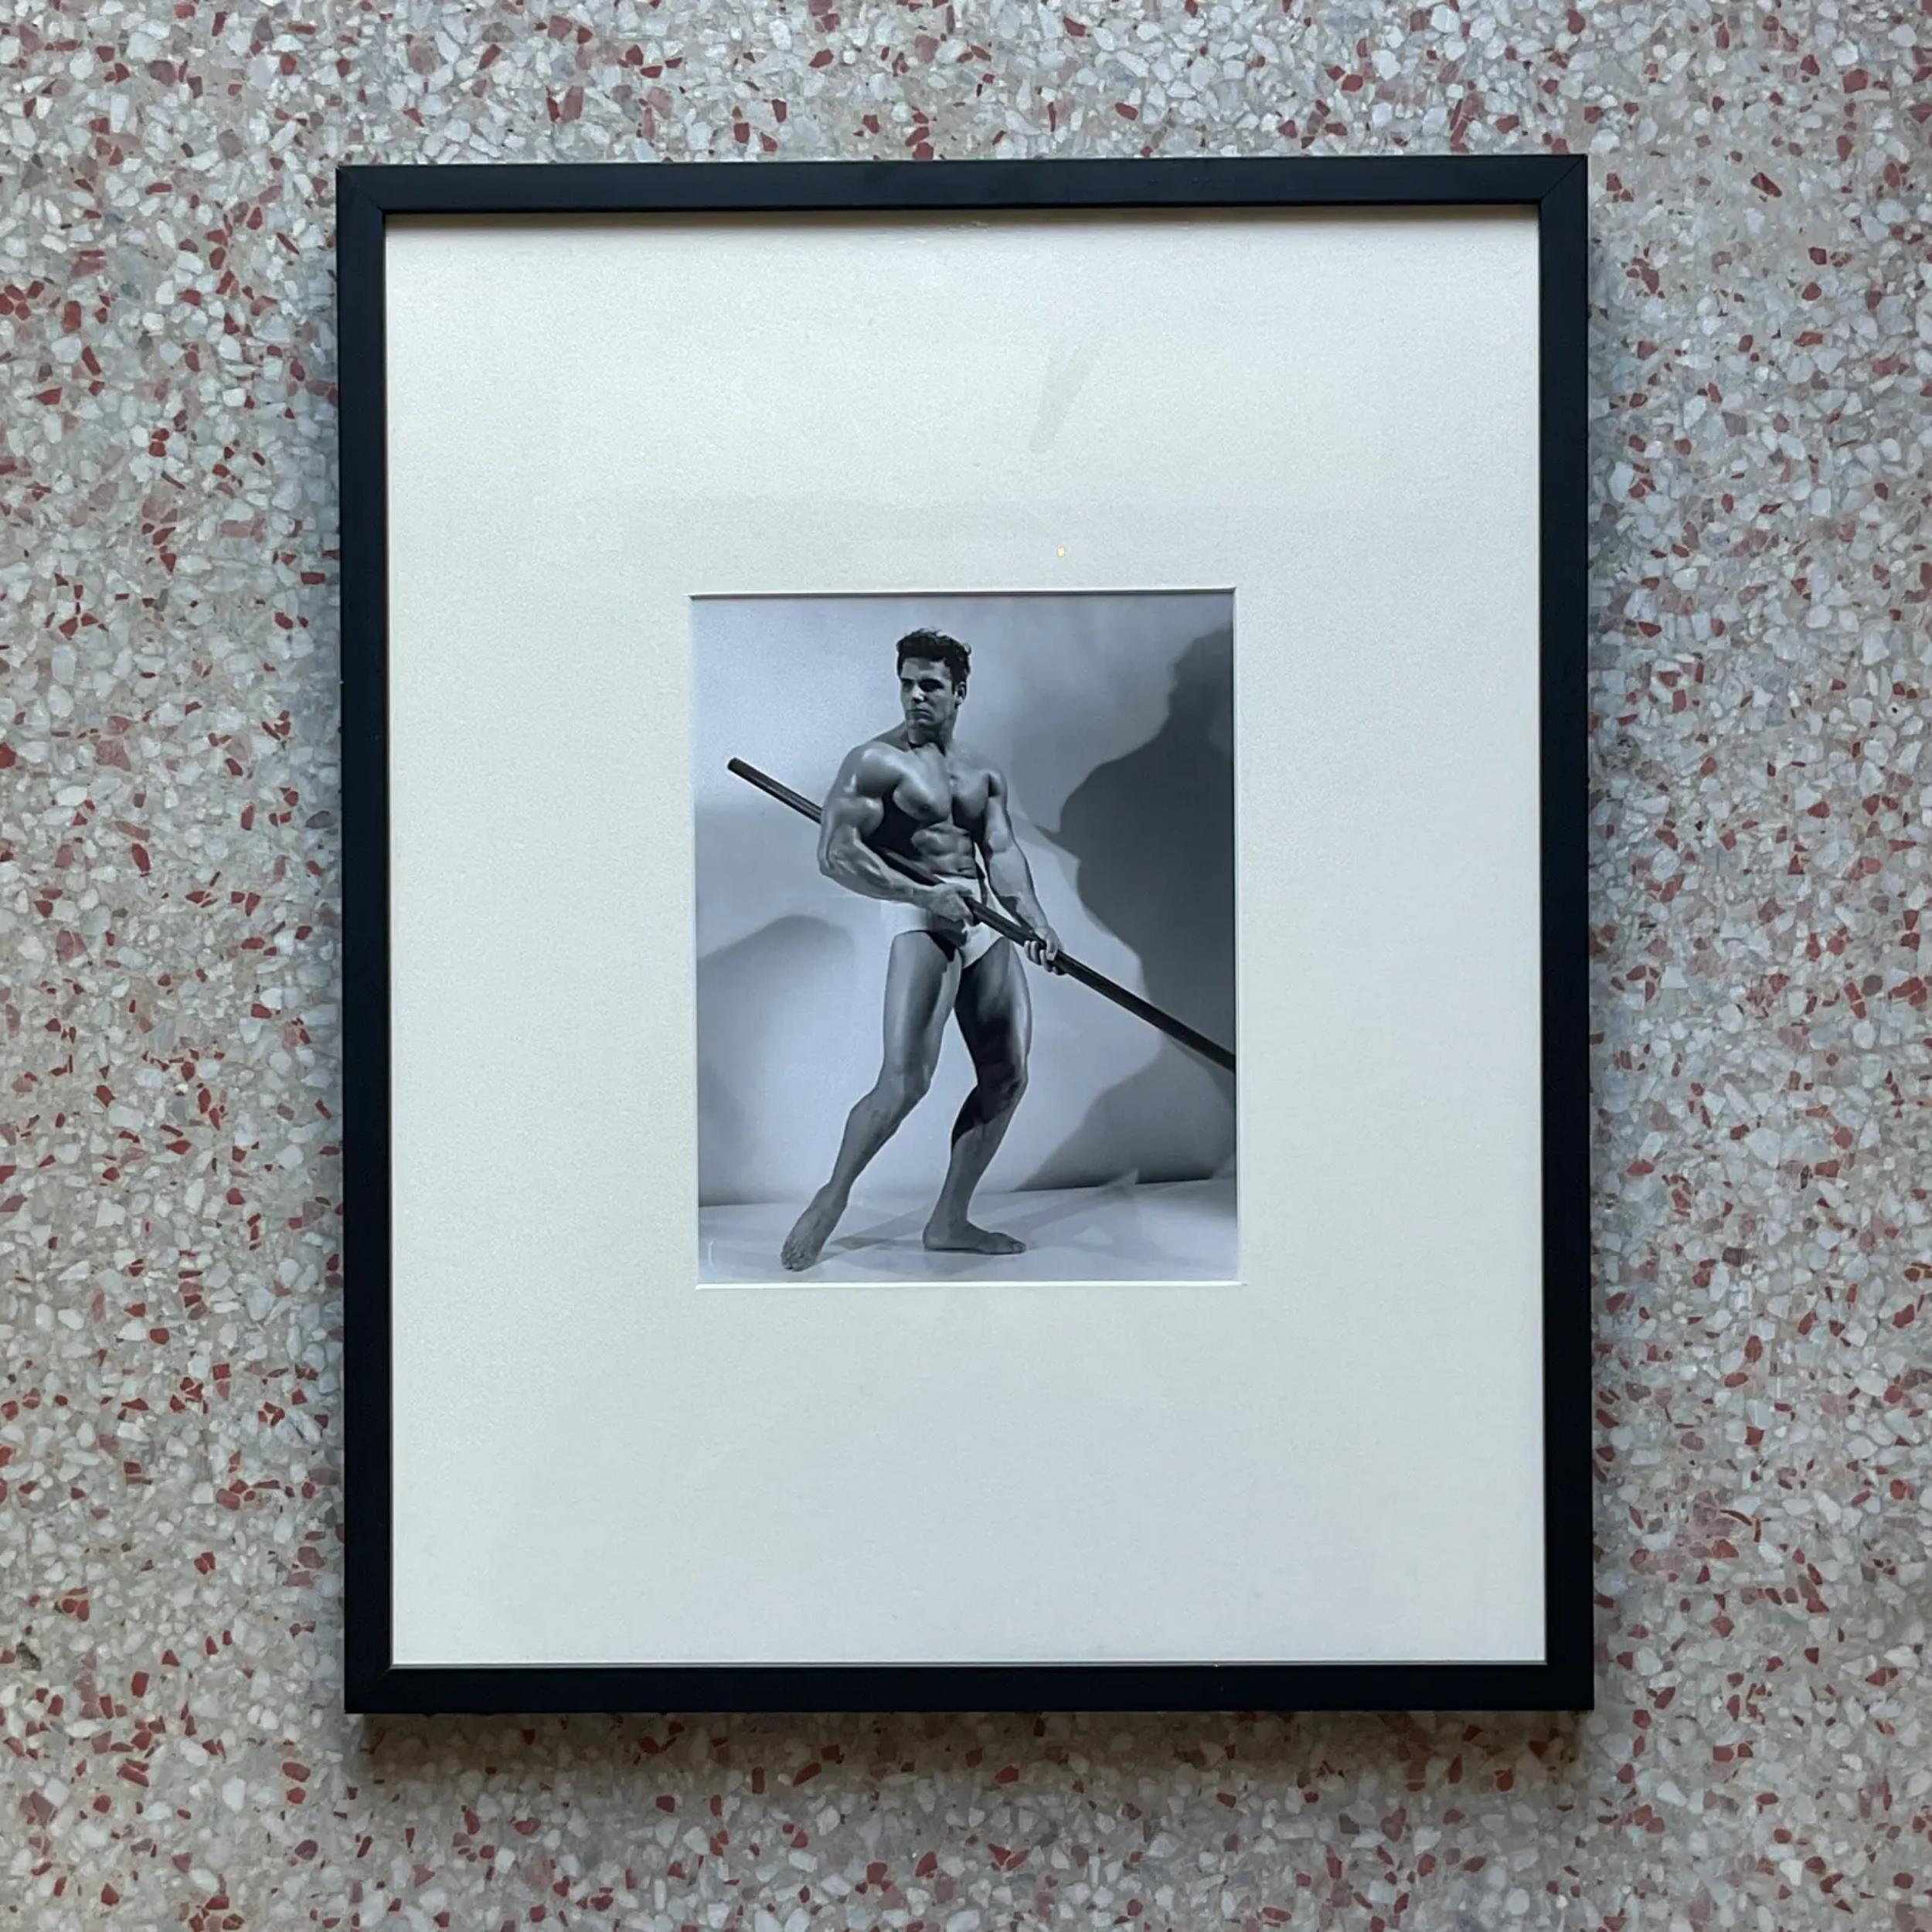 A fabulous MCM Vintage Framed Photograph of Man With Pole Vaulting Pole. Shot by thr infamous Bruce of LA. Purchased from thr estate auction of the artist